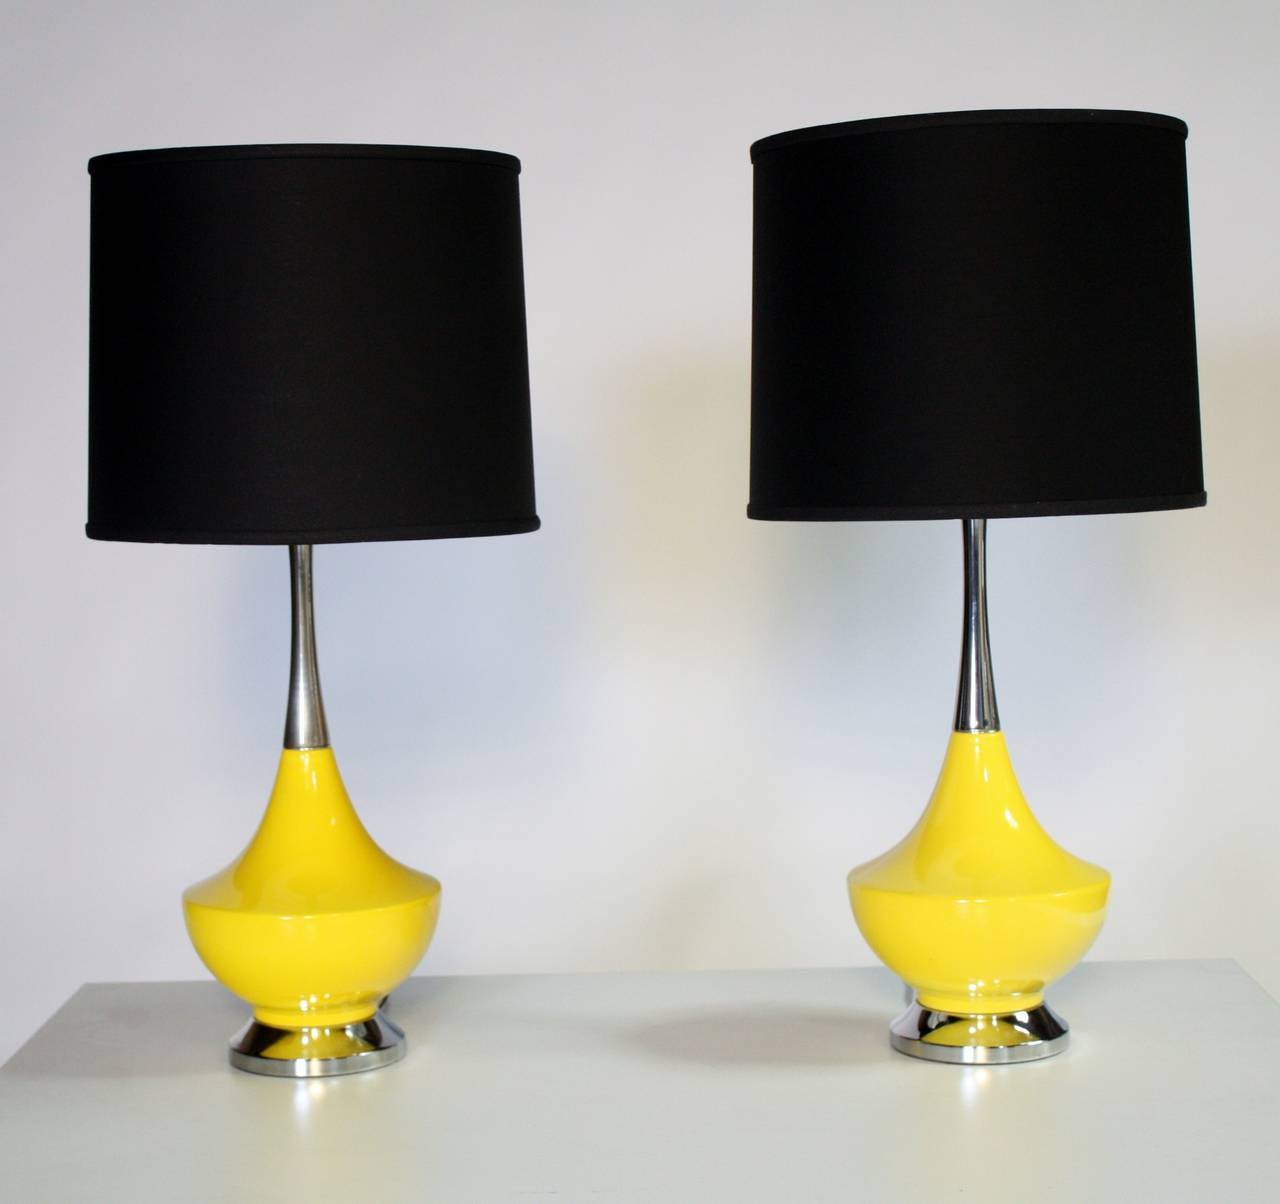 Bright yellow ceramic and chrome genie-shape lamps. Shades not included.